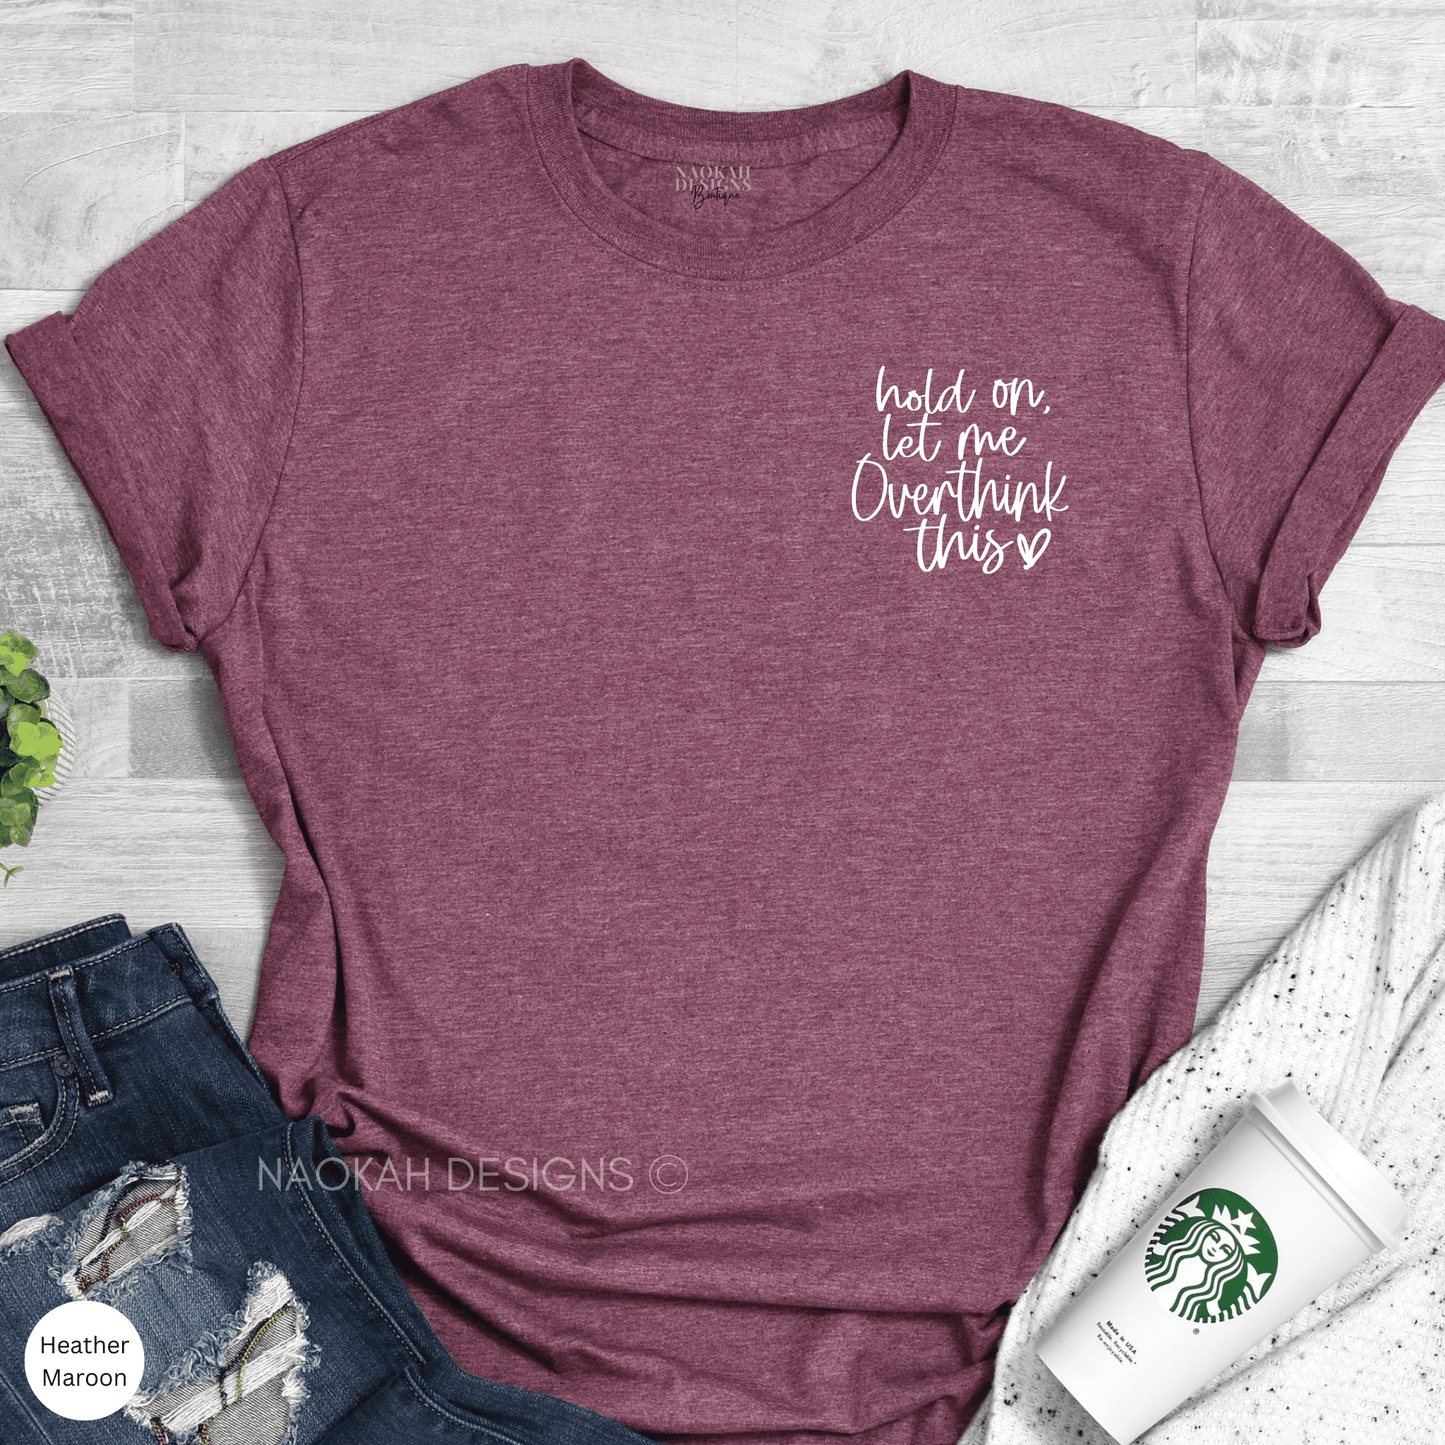 Hold On Let Me Overthink This Shirt, Funny Sarcastic Shirt, Self Love Shirt, Shirts with Sayings, Be Kind Shirt, Anxious Shirt, Mental Tee